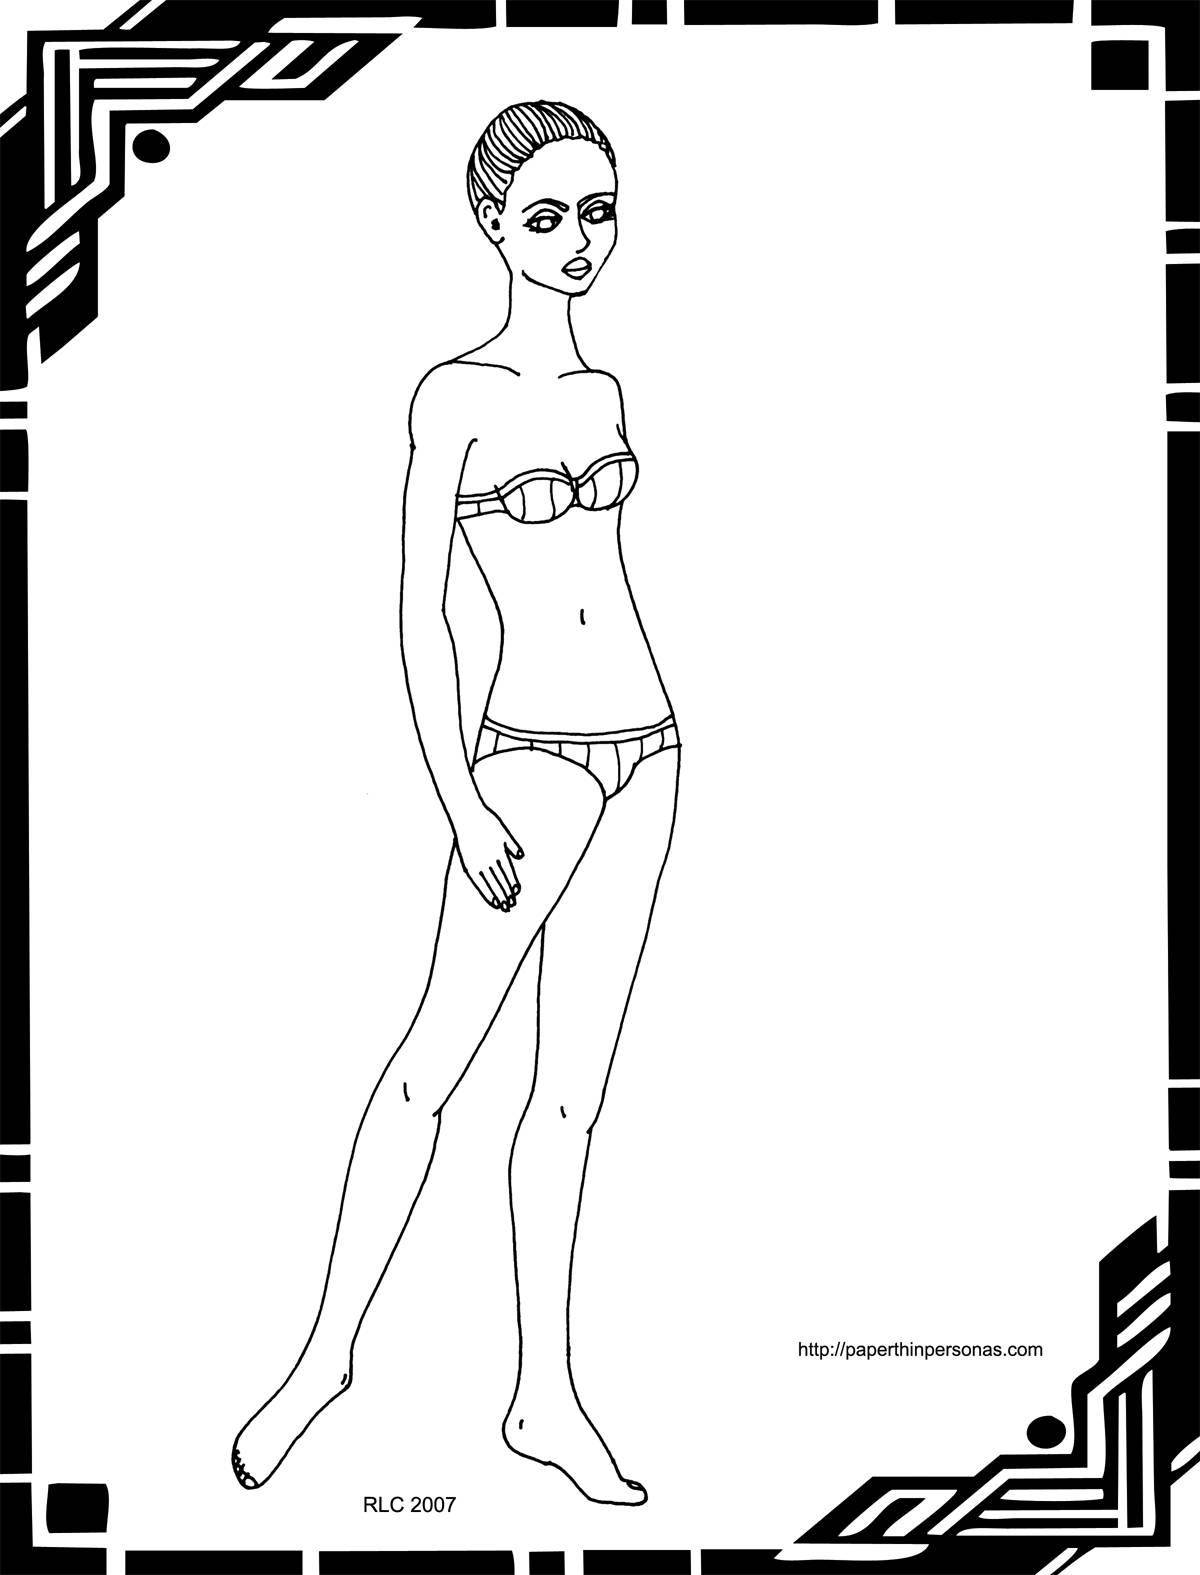 Live coloring barbie doll in a bathing suit